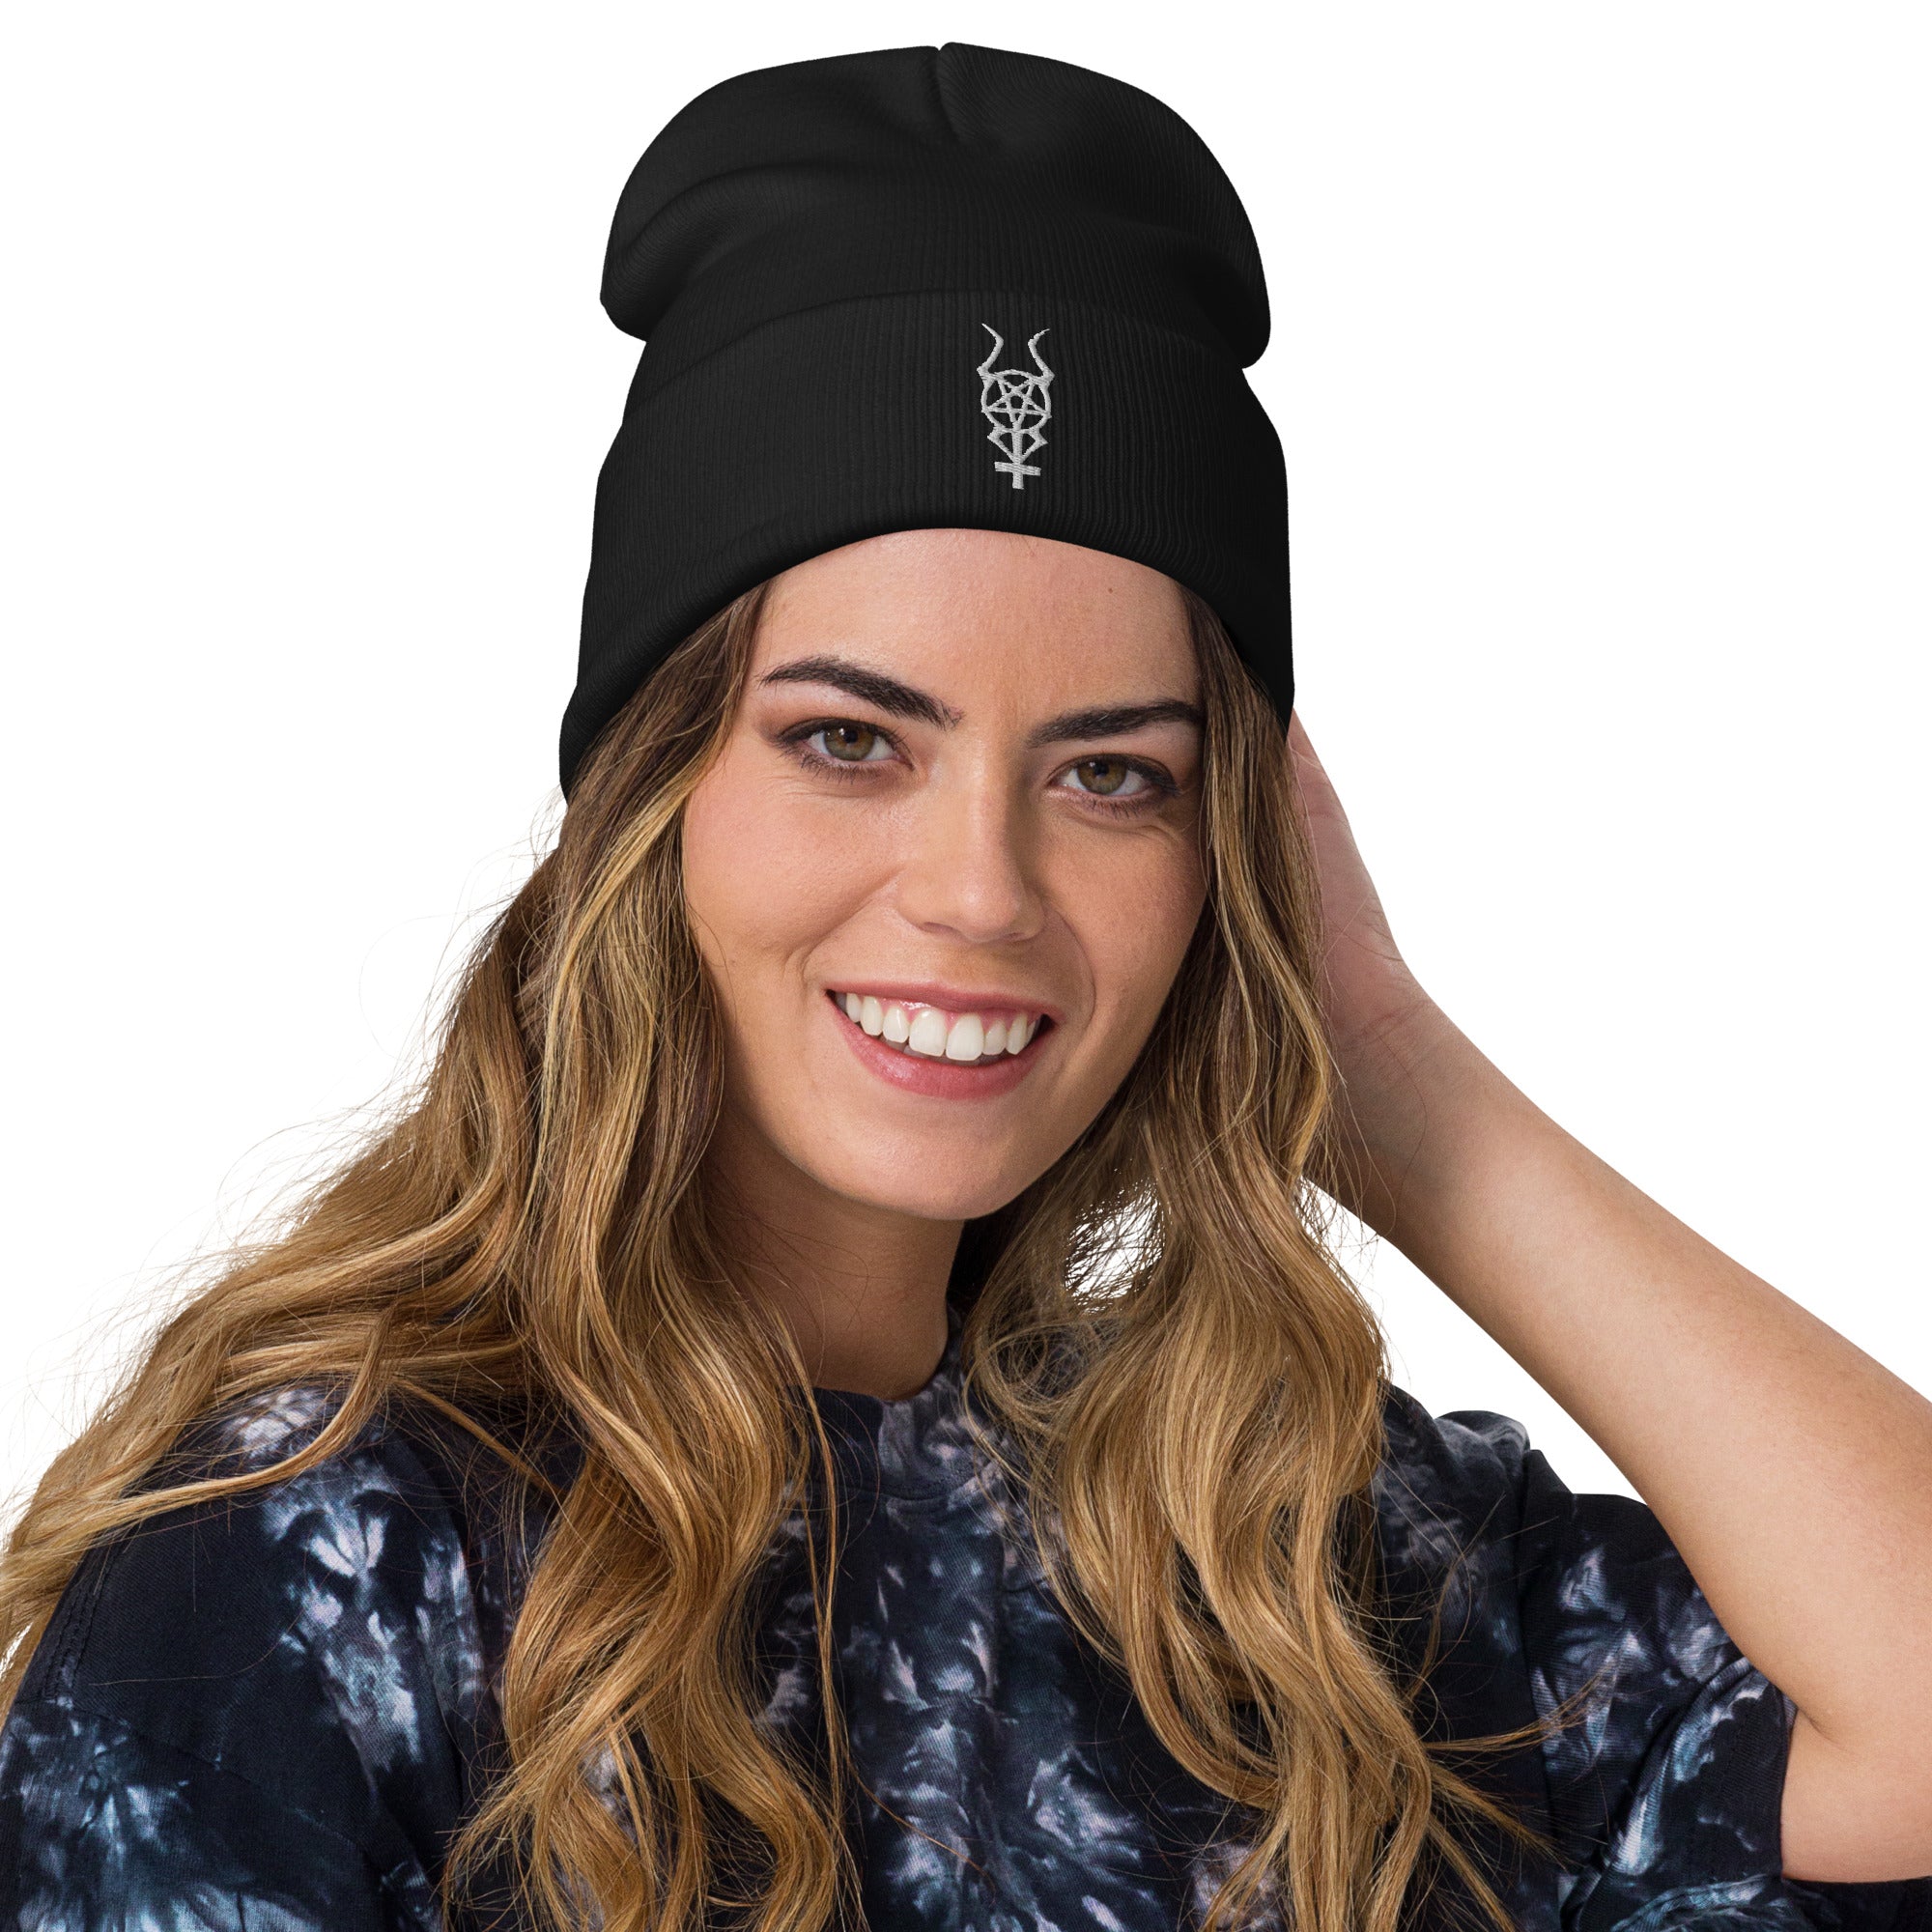 Horned Pentacross Inverted Cross w/ Pentagram and Horns Embroidered Cuff Beanie - Edge of Life Designs